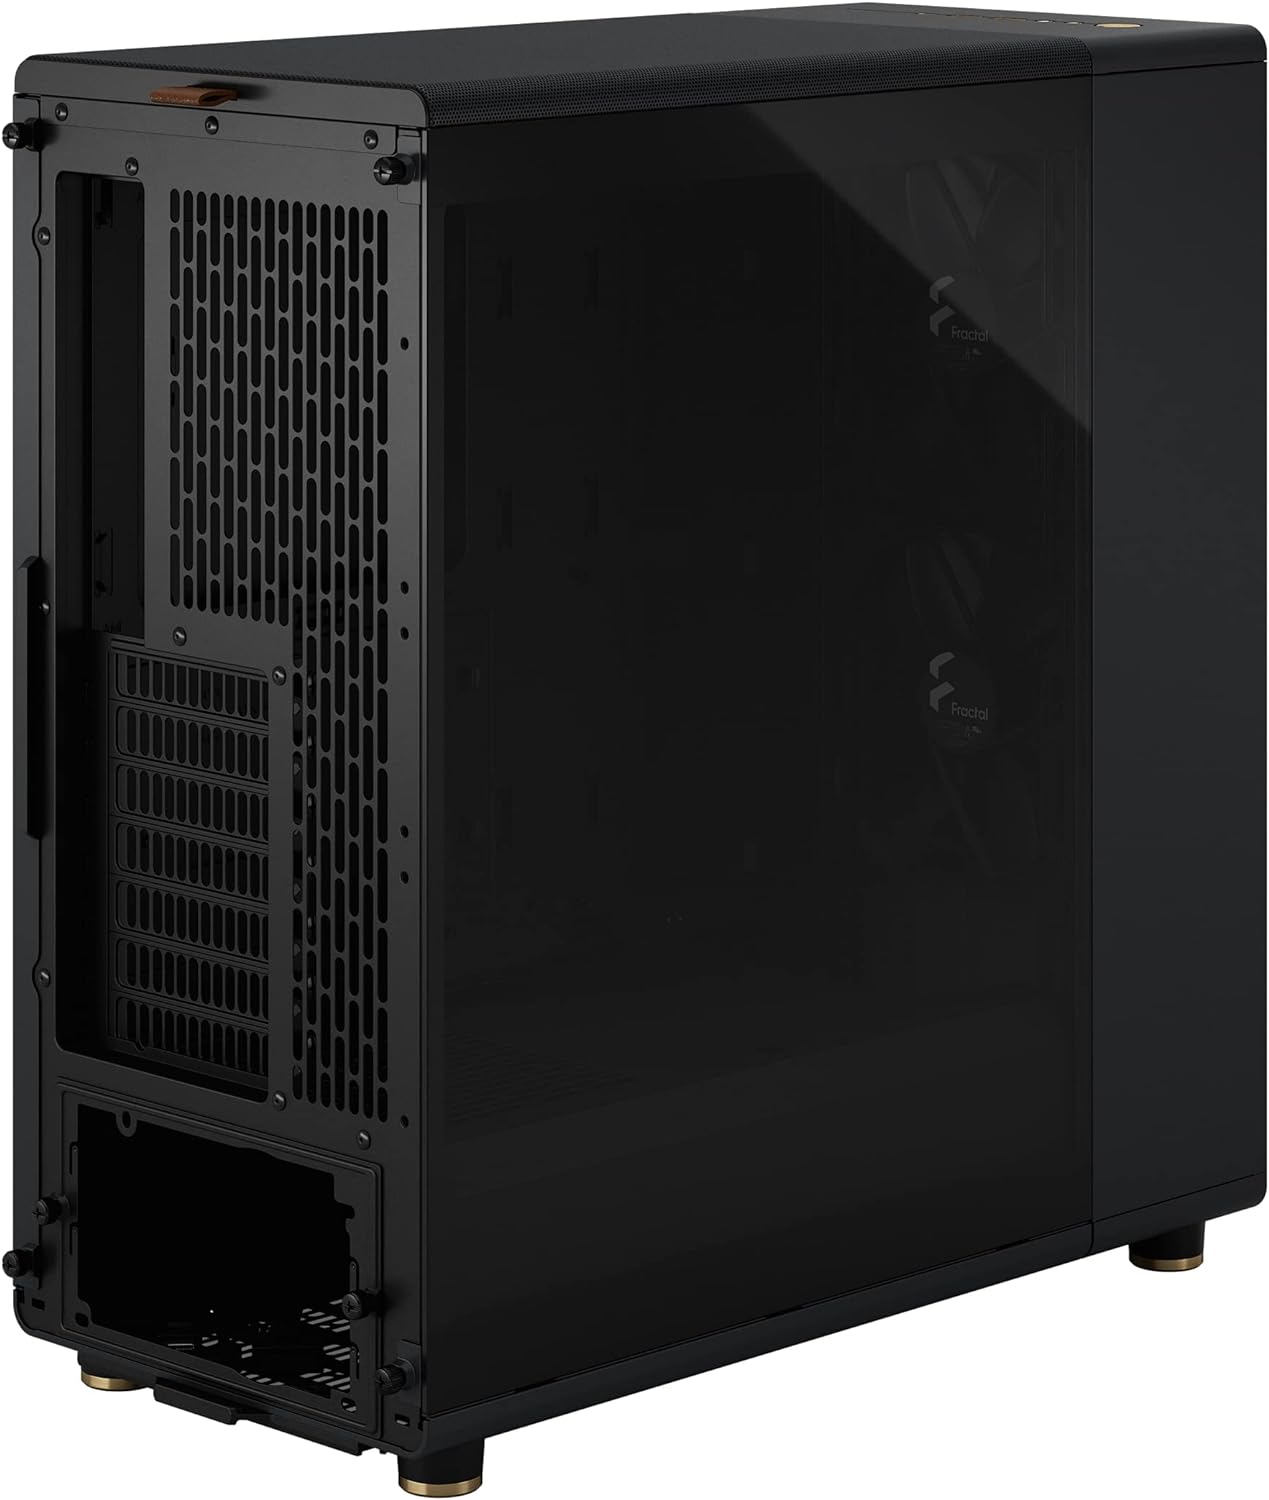 Fractal Design North Charcoal Black Tempered Glass Dark - Genuine Walnut Wood Front - Glass Side Panel - Two 140mm Aspect PWM Fans Included - Type C USB - ATX Airflow Mid Tower PC Gaming Case